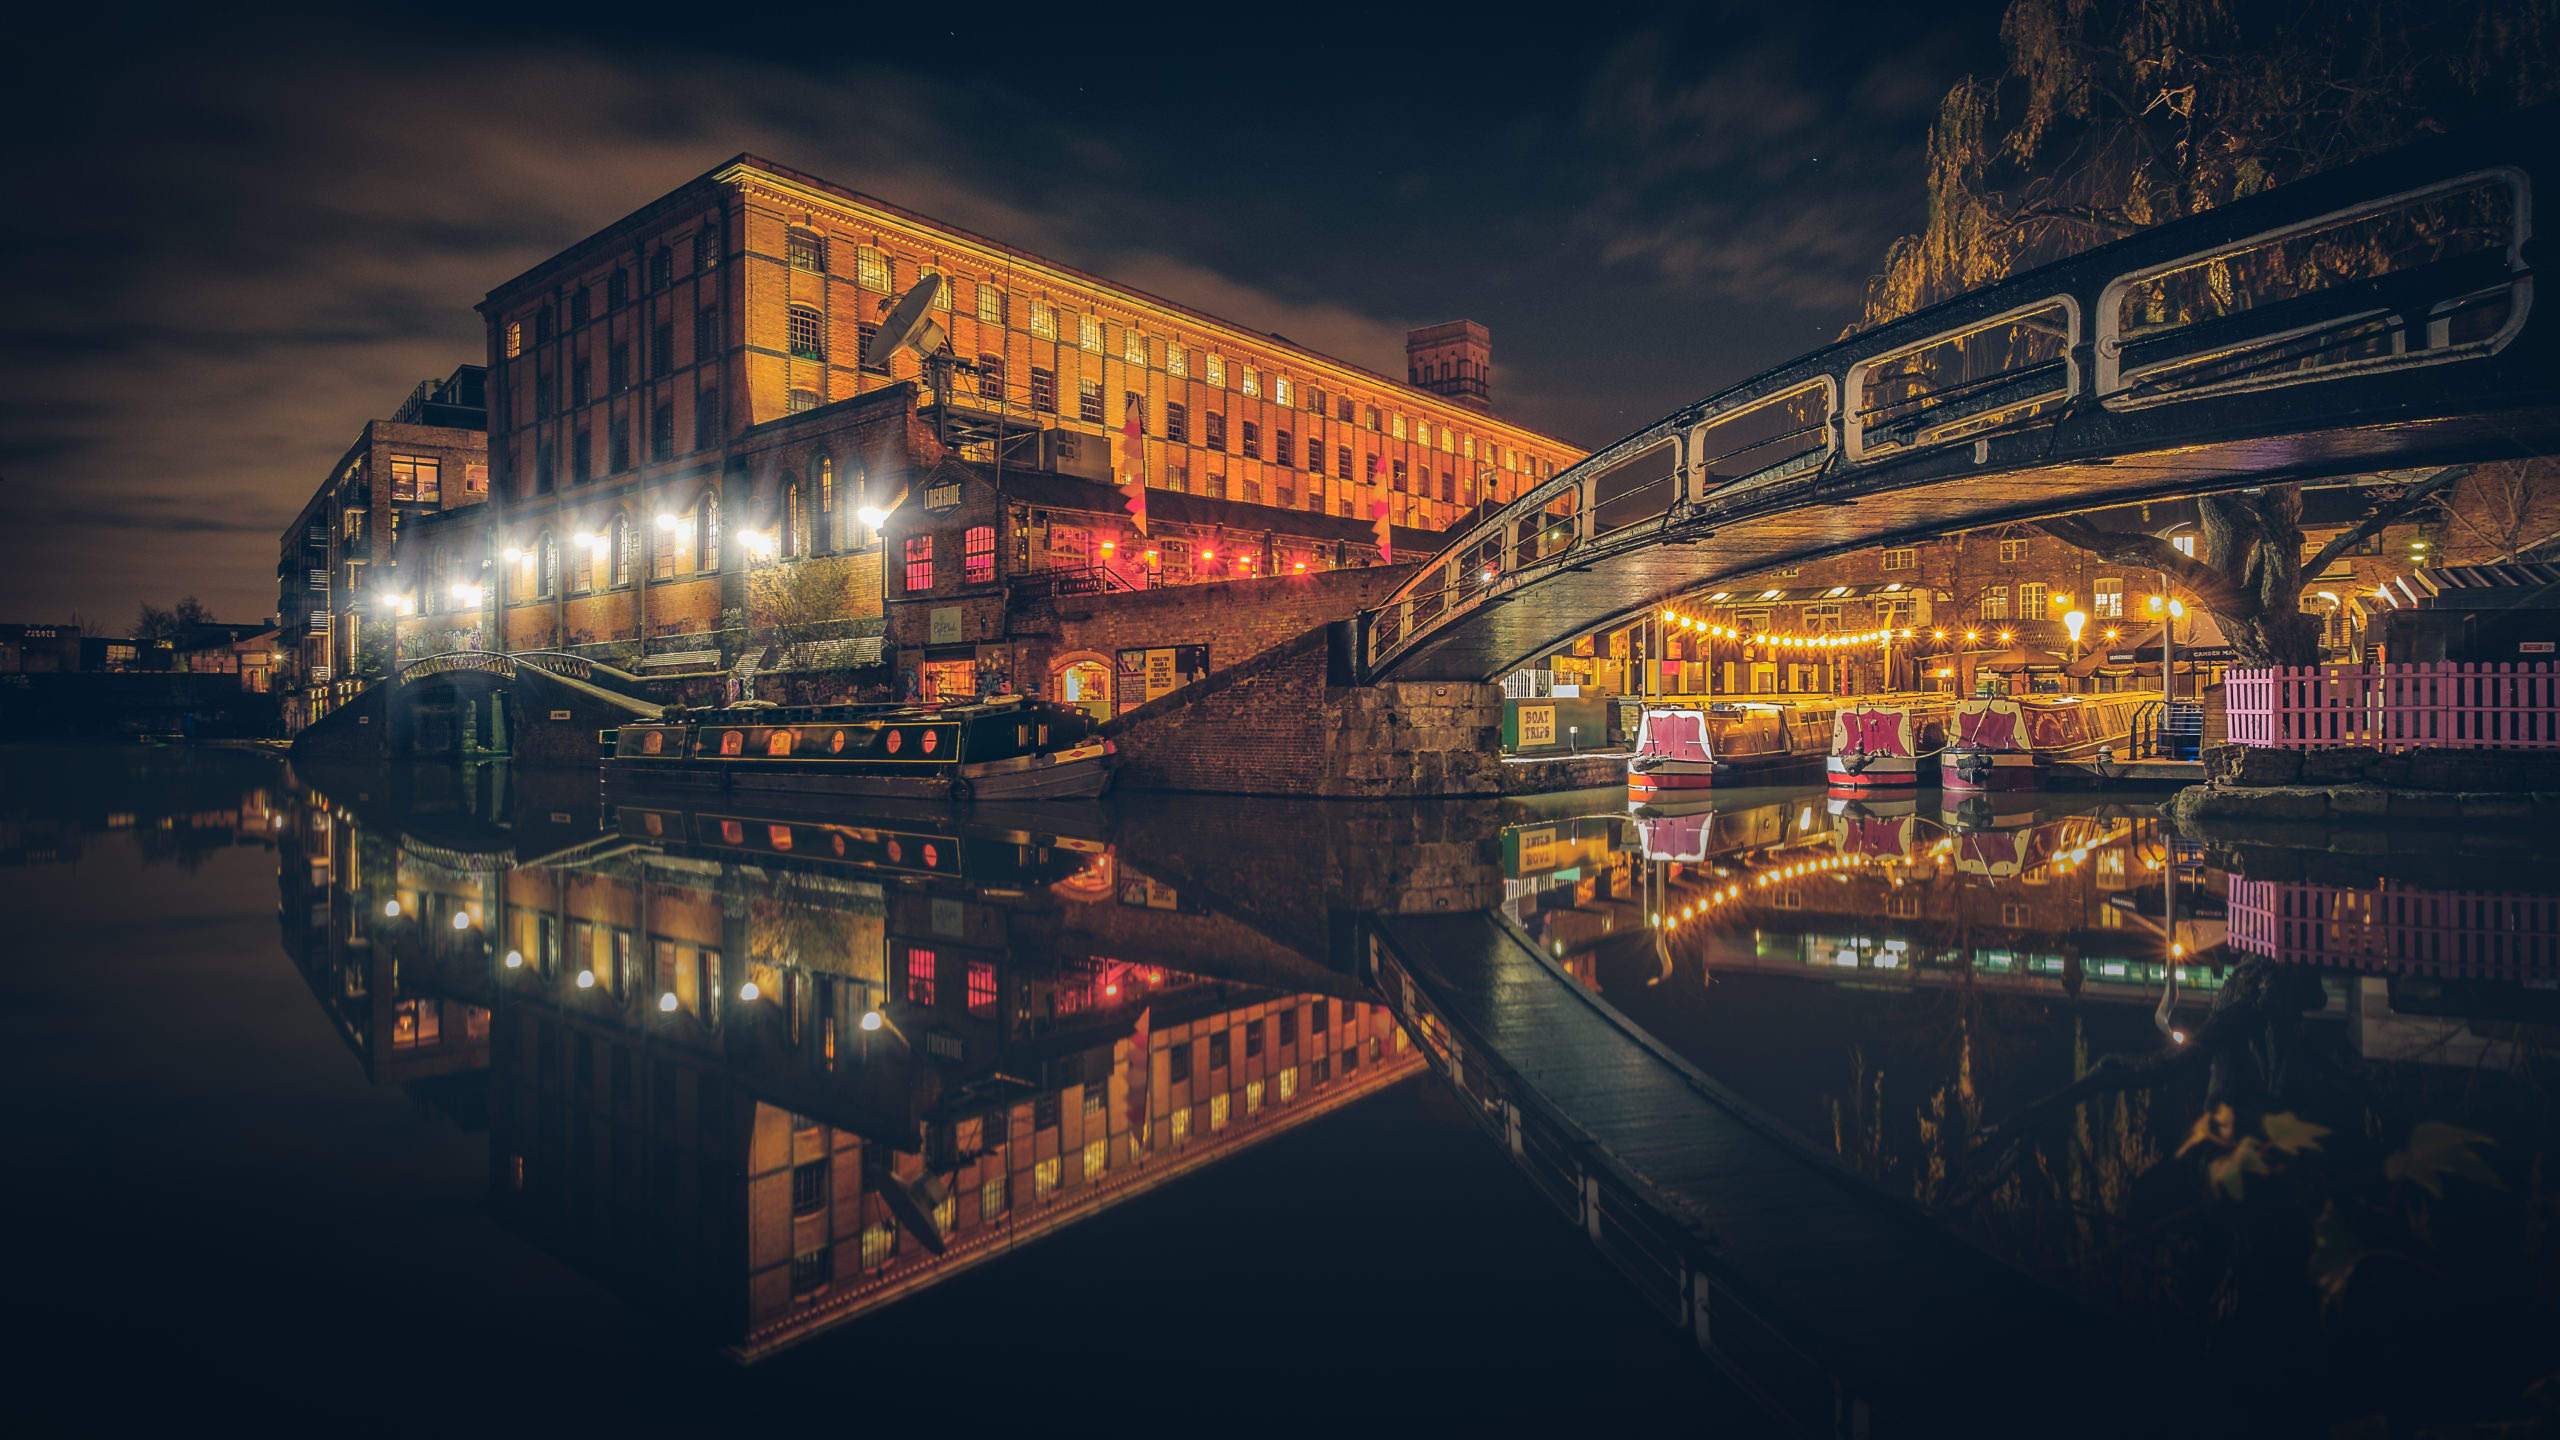 A photo of Camden Lock at night, with the reflection of the bridge on the canal